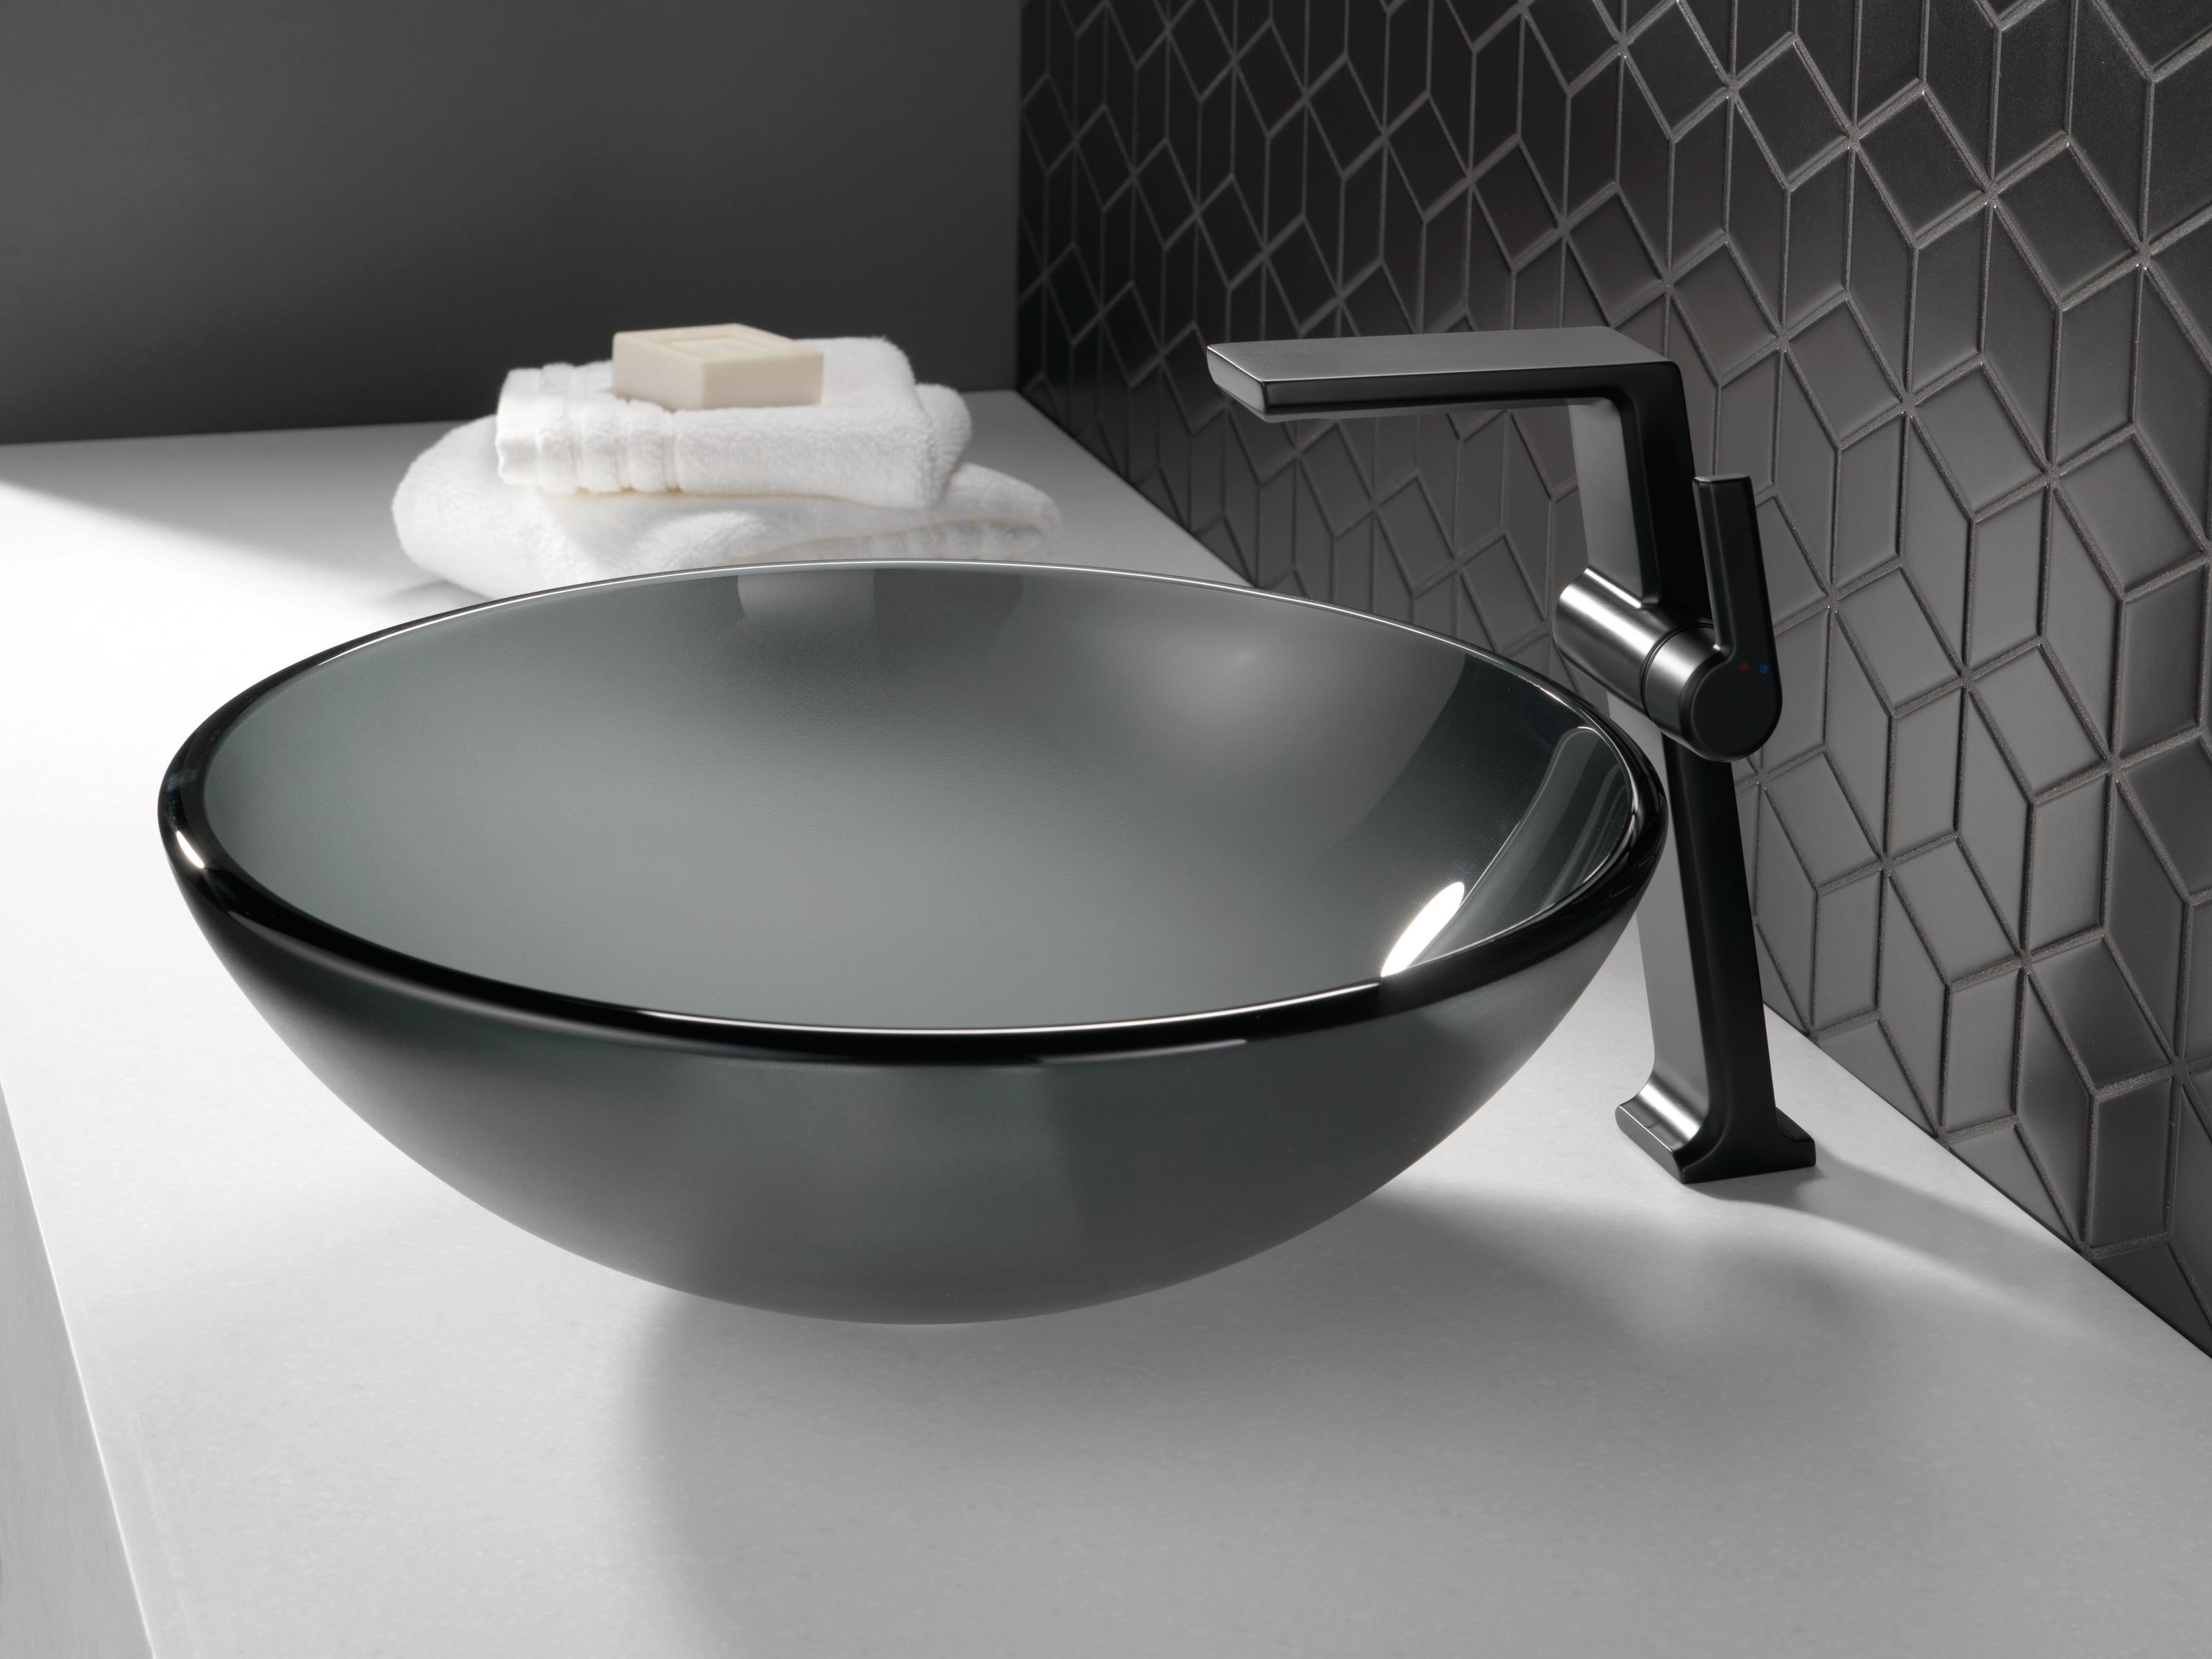 11 modern bath faucets for your next renovation | residential